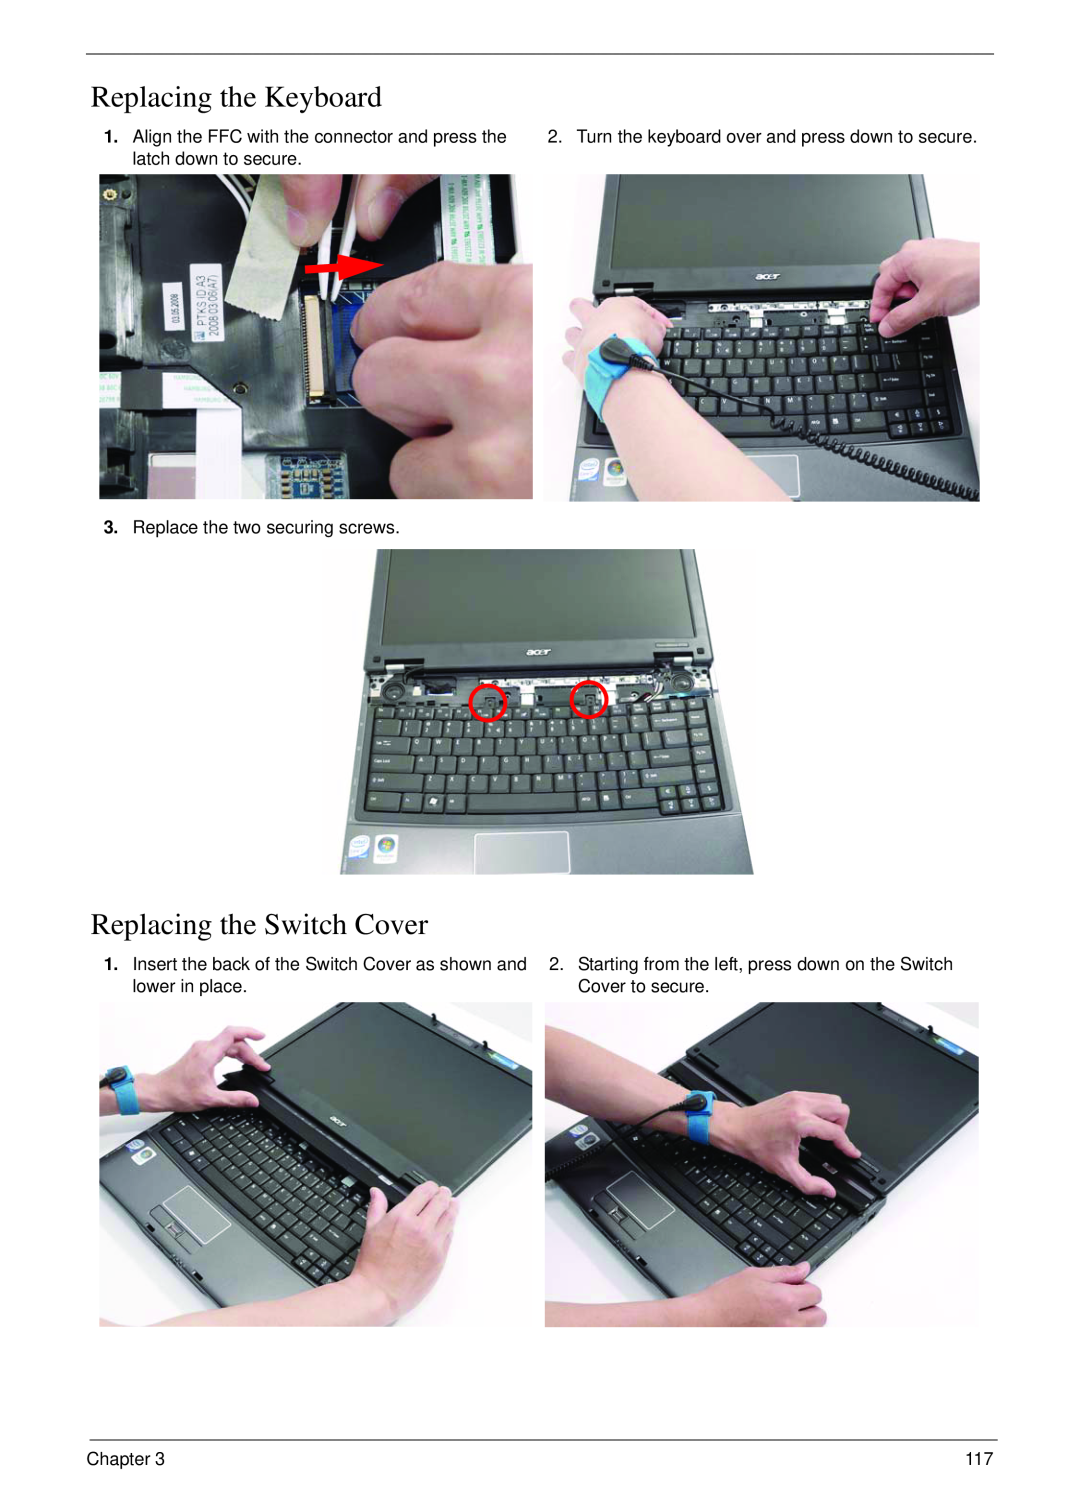 Acer 4730 Replacing the Keyboard, Replacing the Switch Cover, Turn the keyboard over and press down to secure, Chapter 